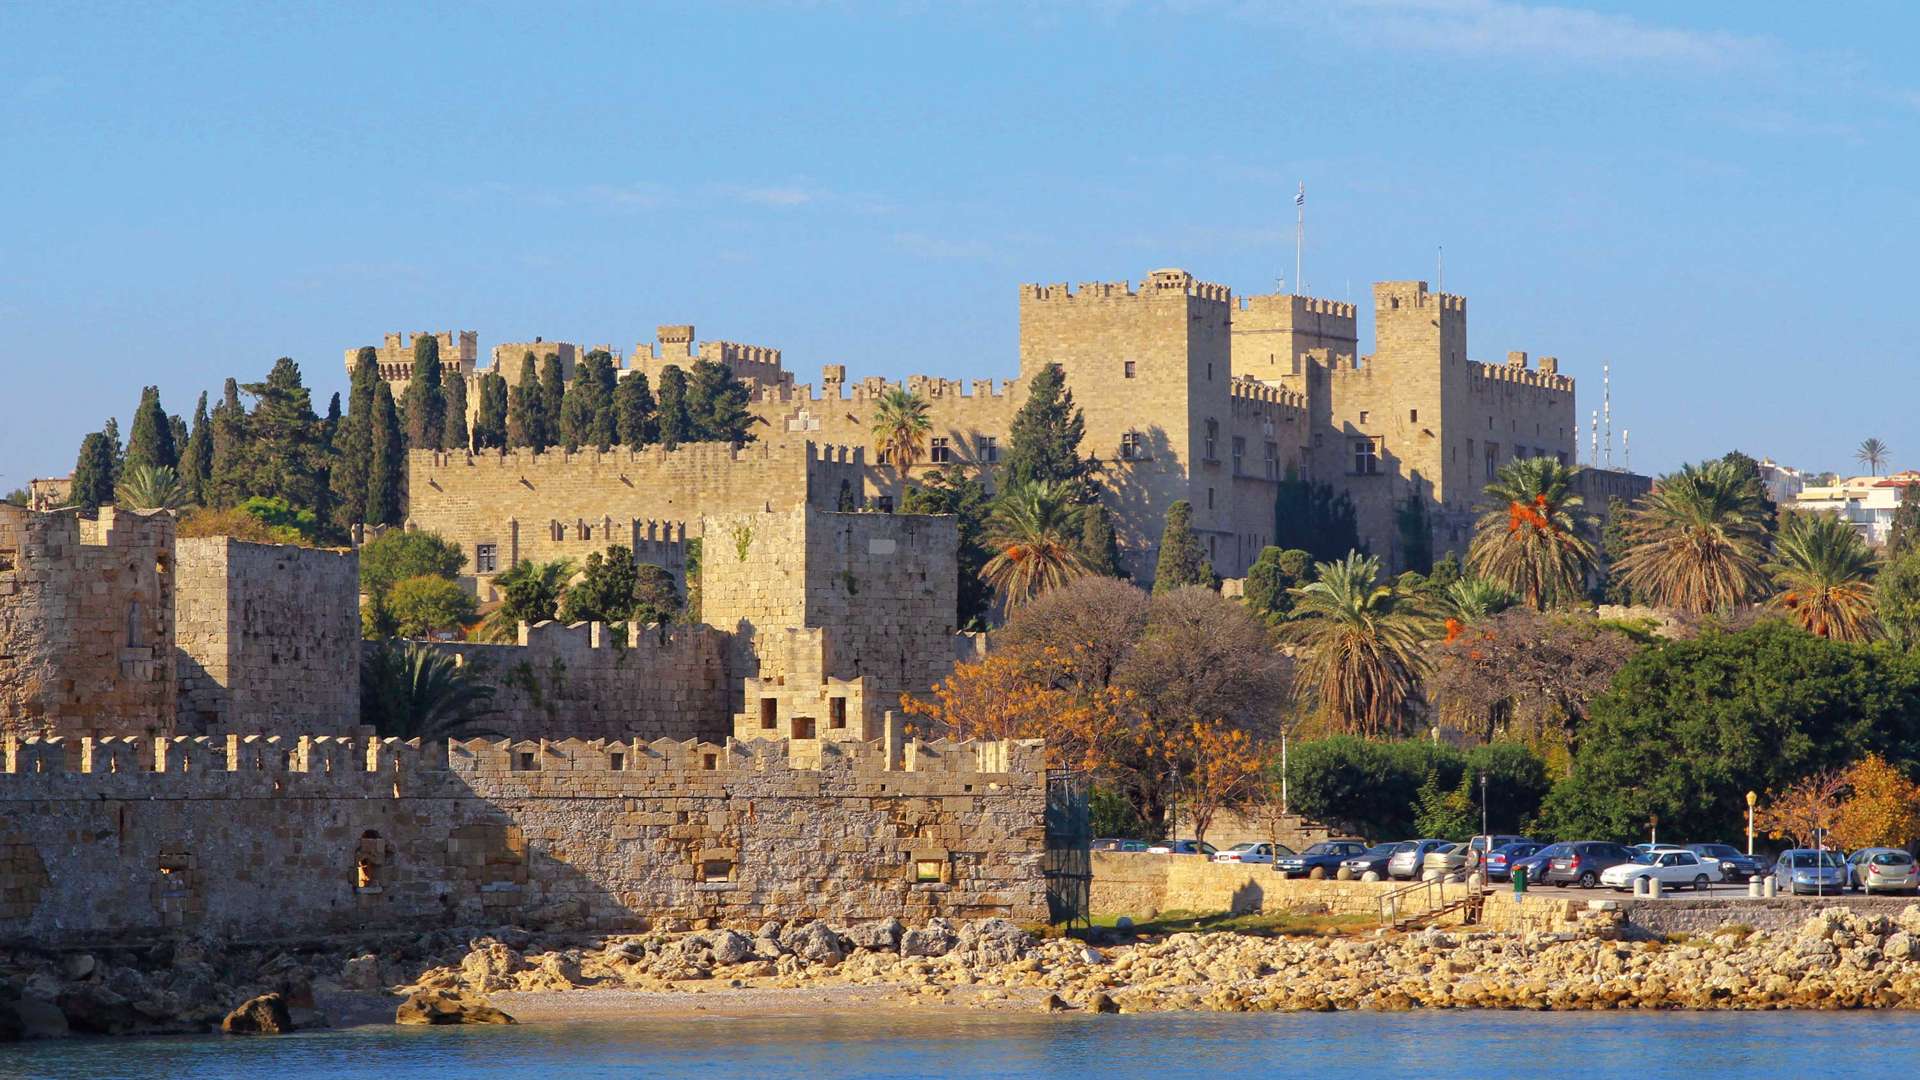 Grand Masters Palace, Rhodes, Greece